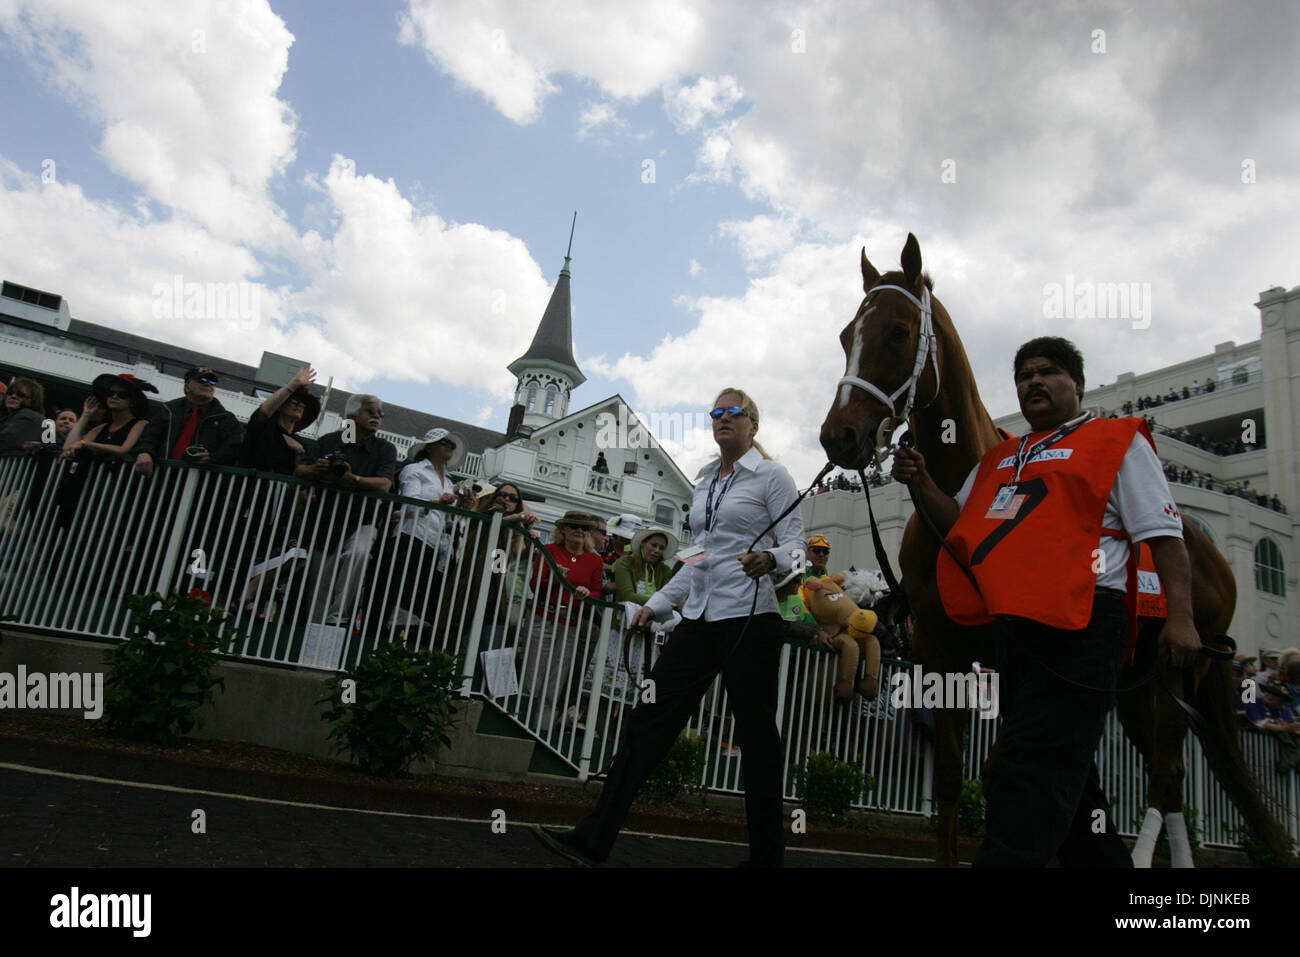 7 Bayou's Lassie is led around the paddock before the 7th race at the 134th running of the Kentucky Derby Saturday May 3, 2008, at Churchill Downs, Louisville, Ky. Photo by Brad Luttrell  (Credit Image: Stock Photo